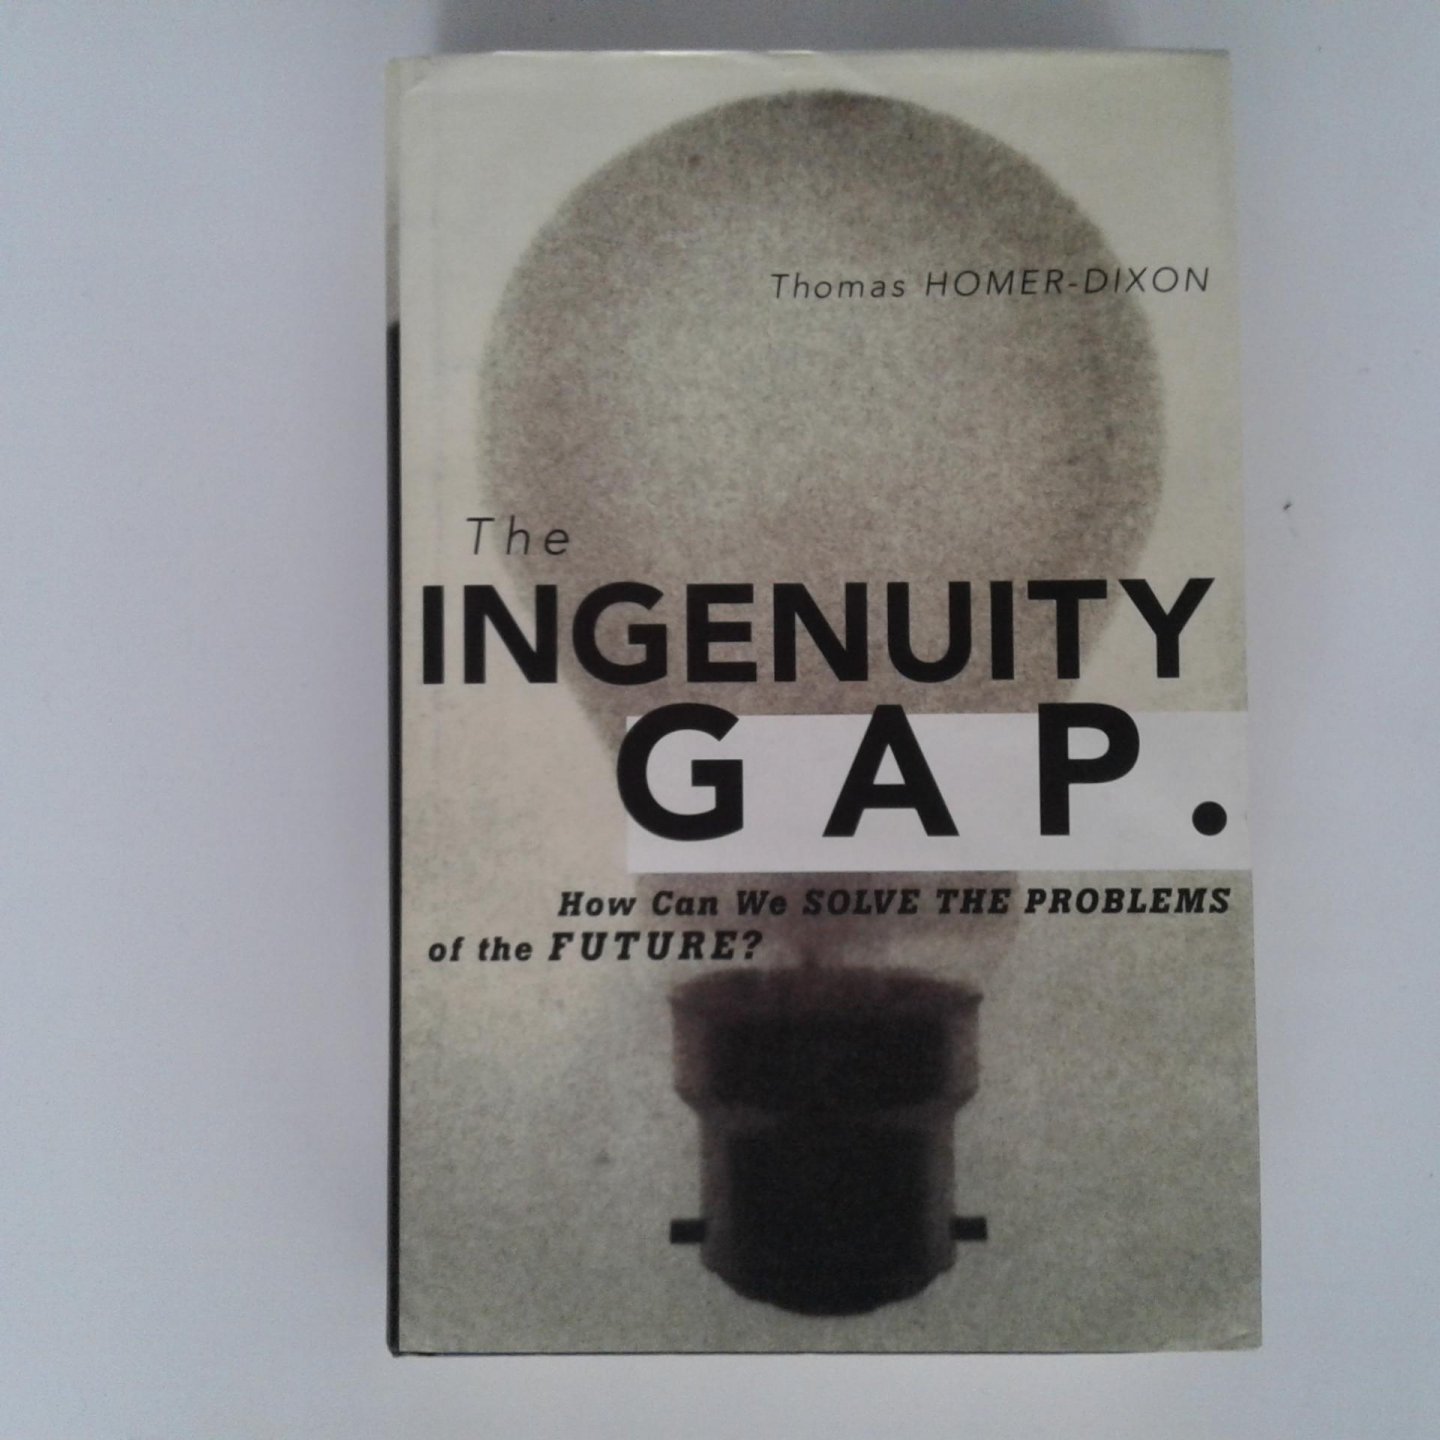 Homer-Dixon, Thomas - The Ingenuity GAP ; How can we solve the problems of the future